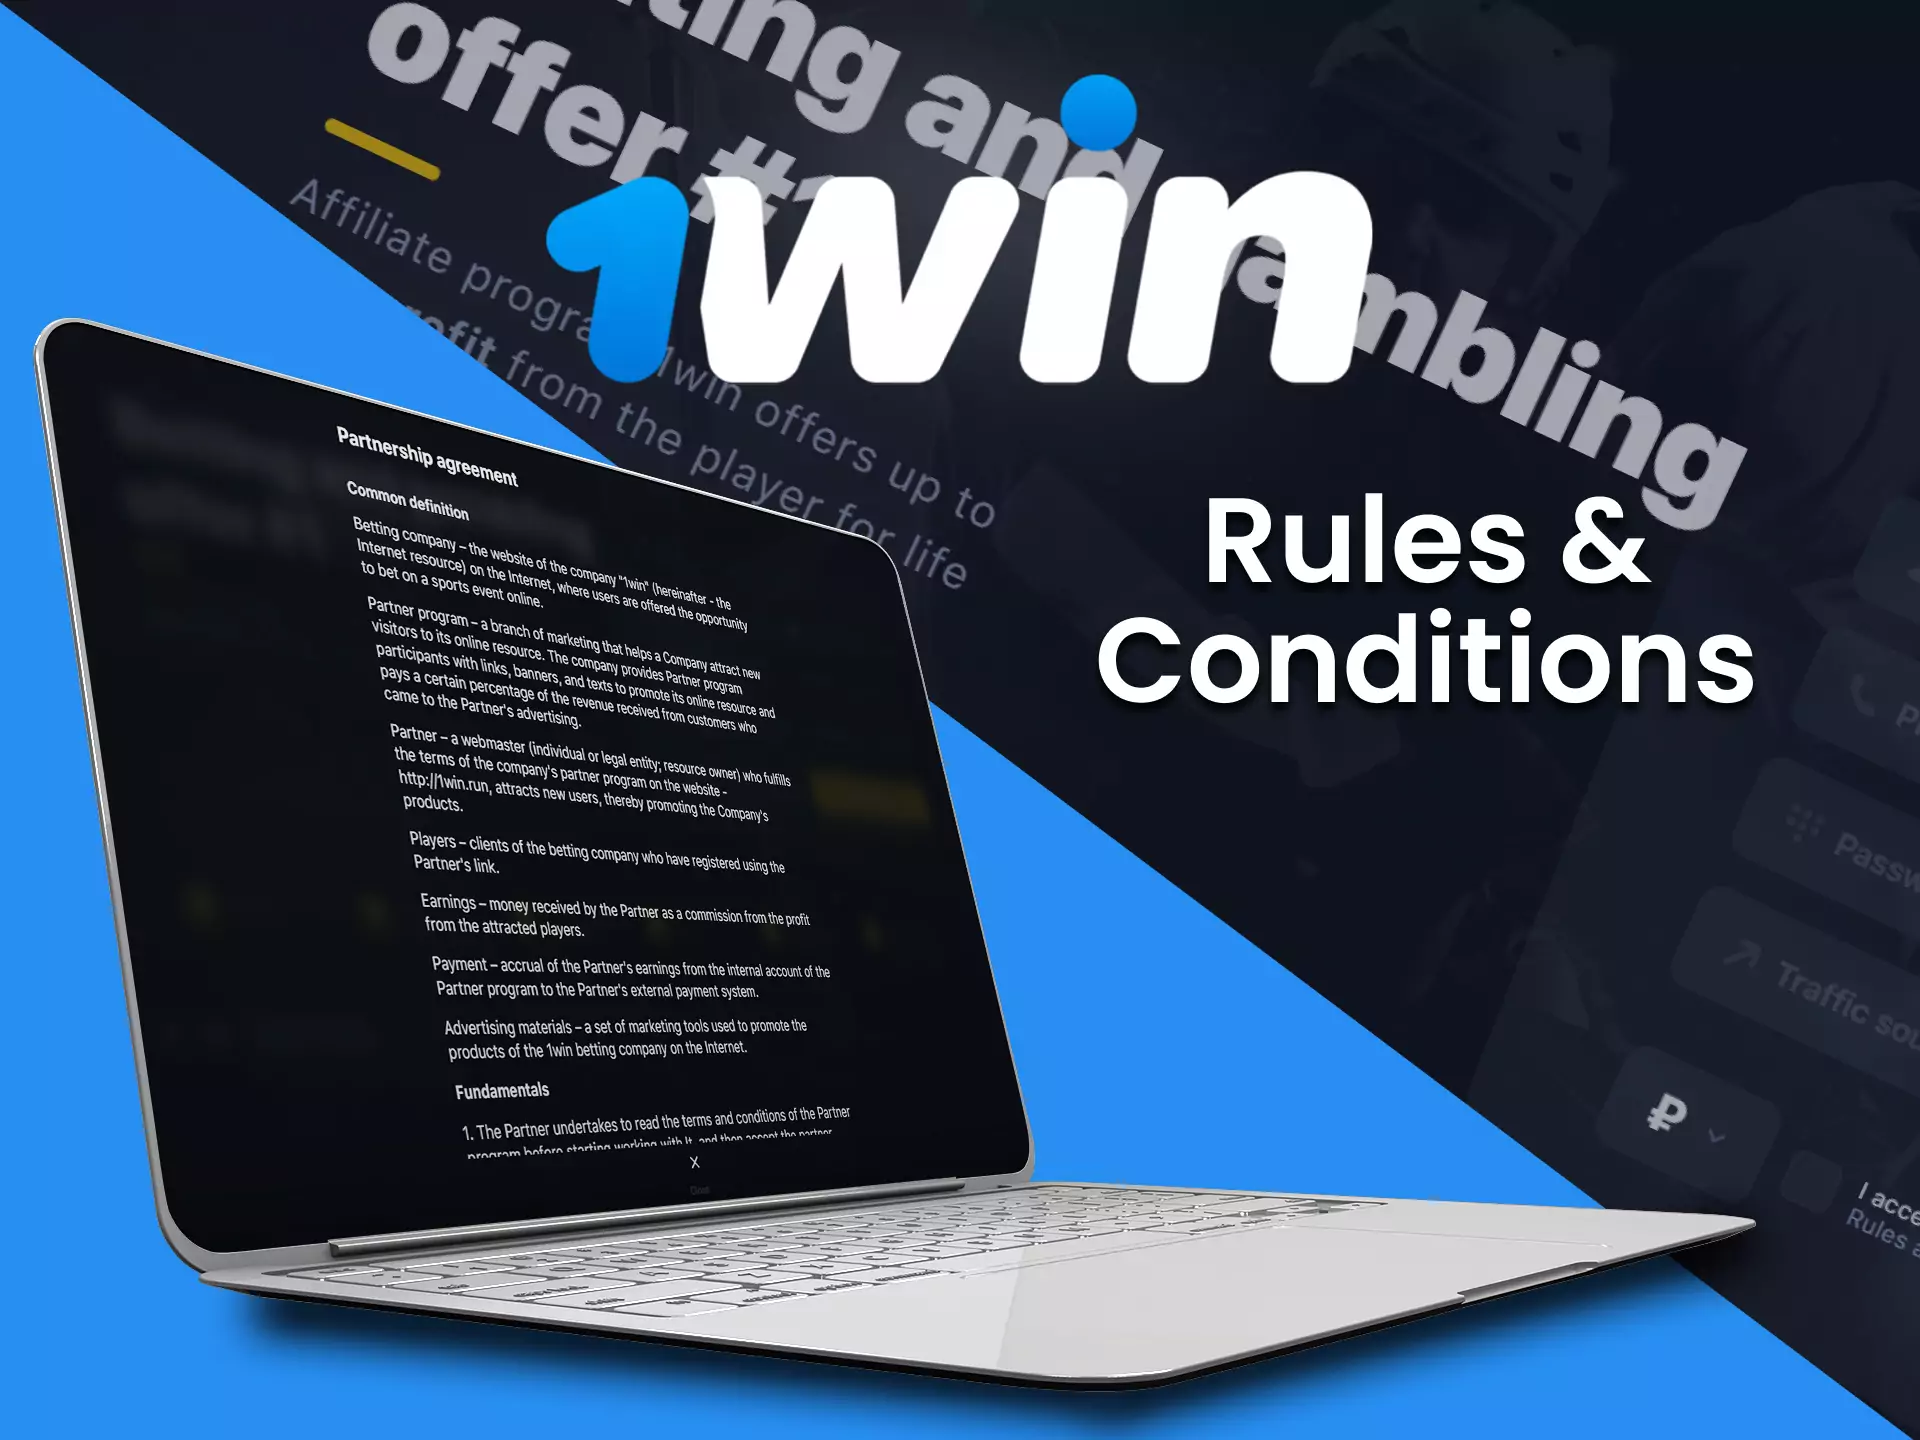 Follow the rules of the 1win affiliate program not to be banned by the platform.